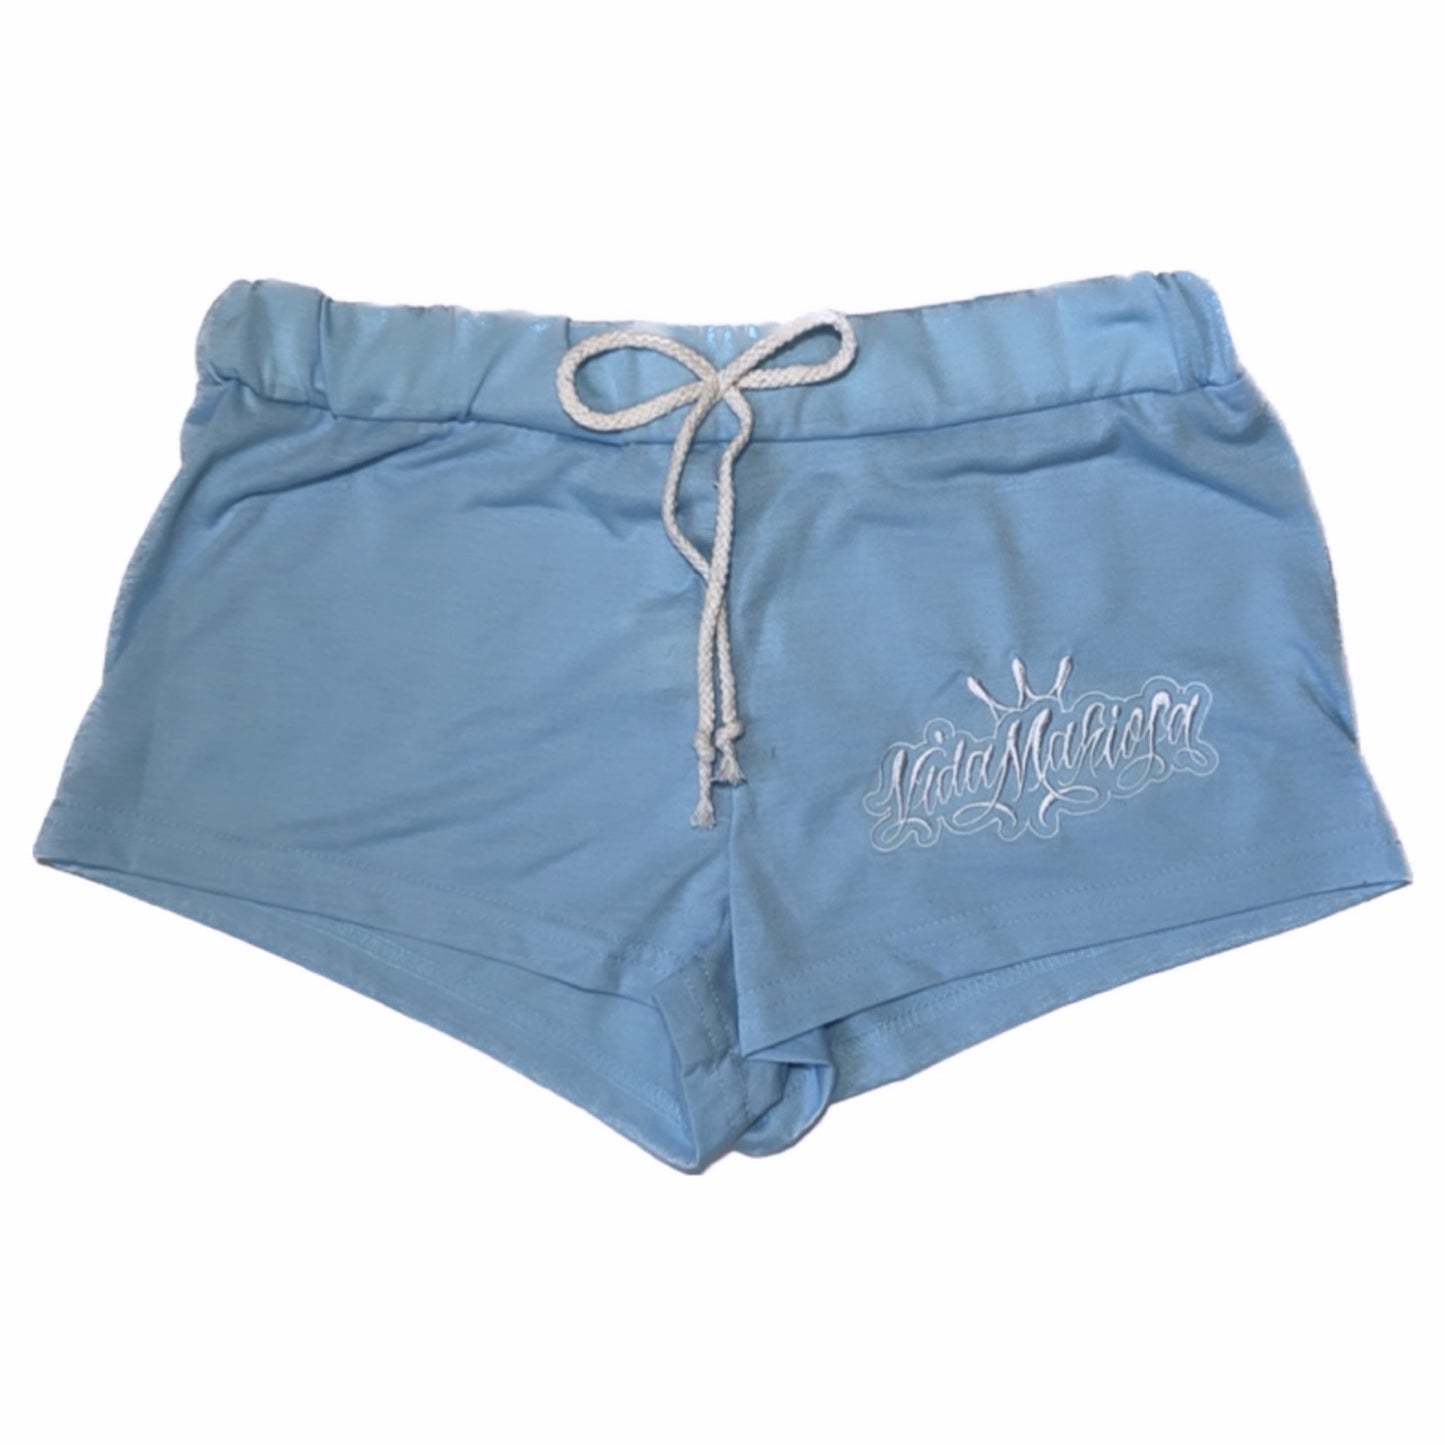 Women's Embroidered Booty Shorts